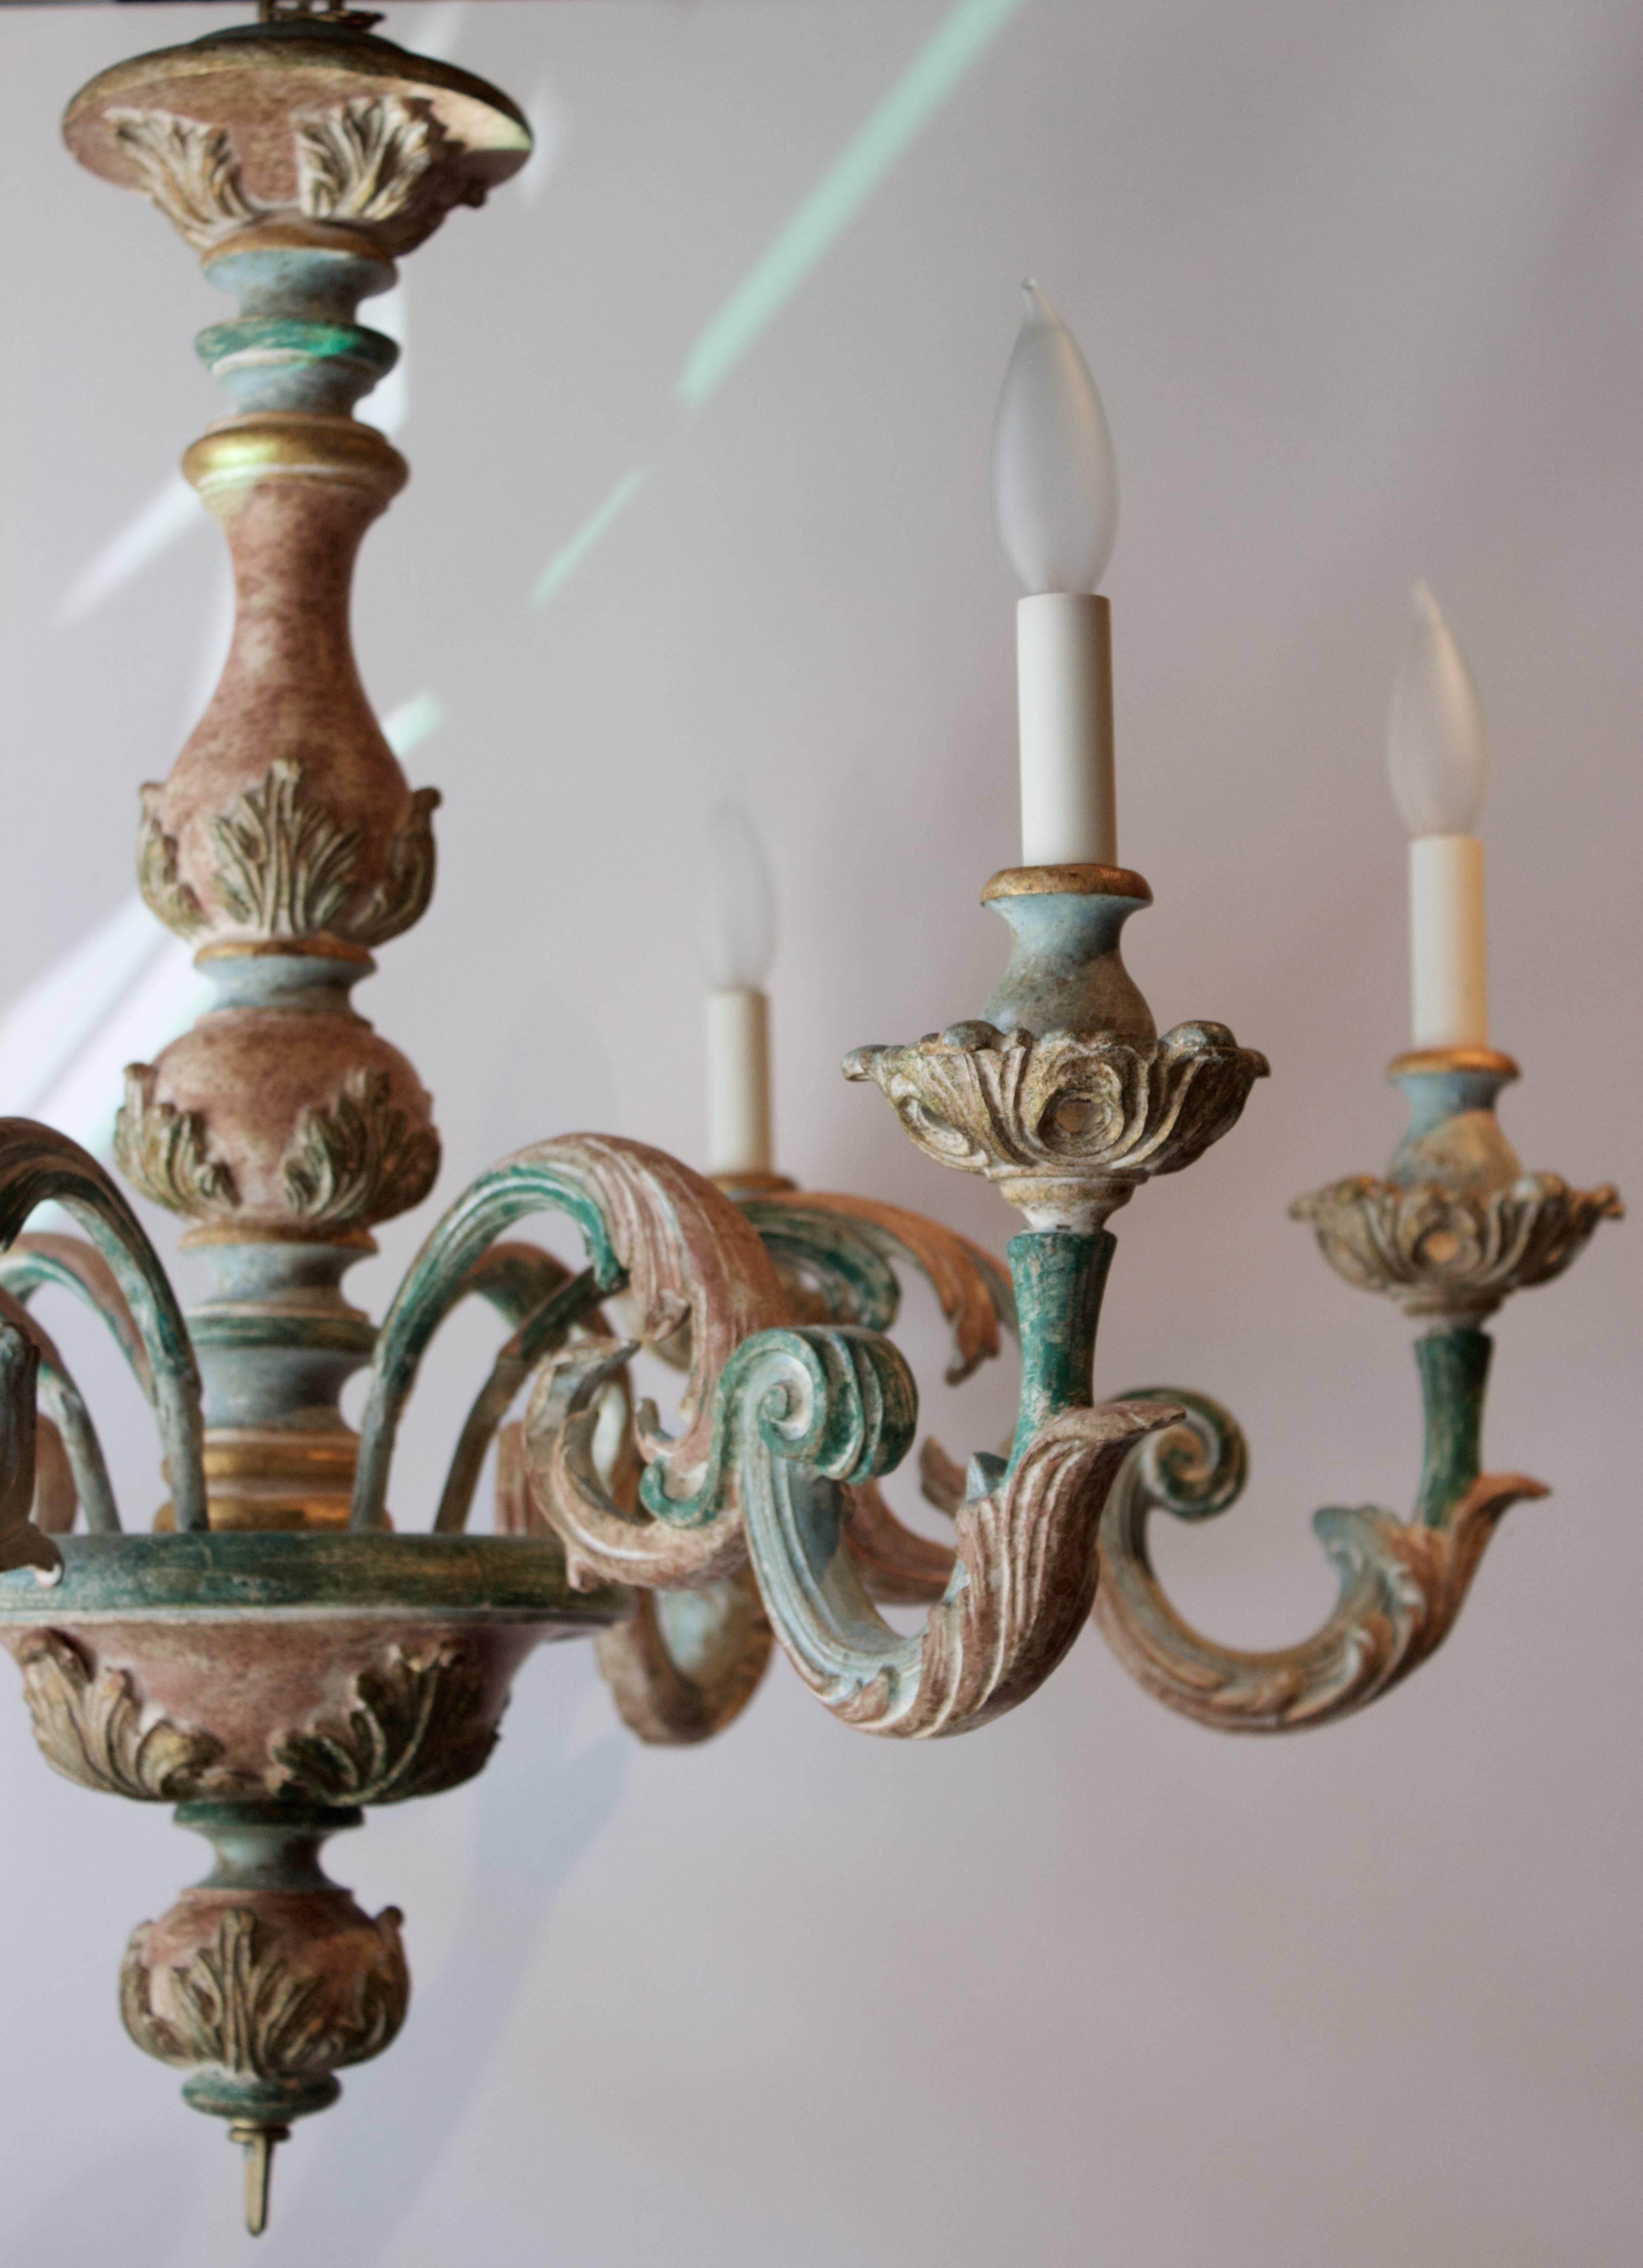 Beautiful Italian Rococo revival hand-carved and painted wooden chandelier. Beautiful scrolls of acanthus leaves are the motif of this Italian chandelier. Hand-painted delicately with gilt accents. Finial could support a tassel or be replaced by a